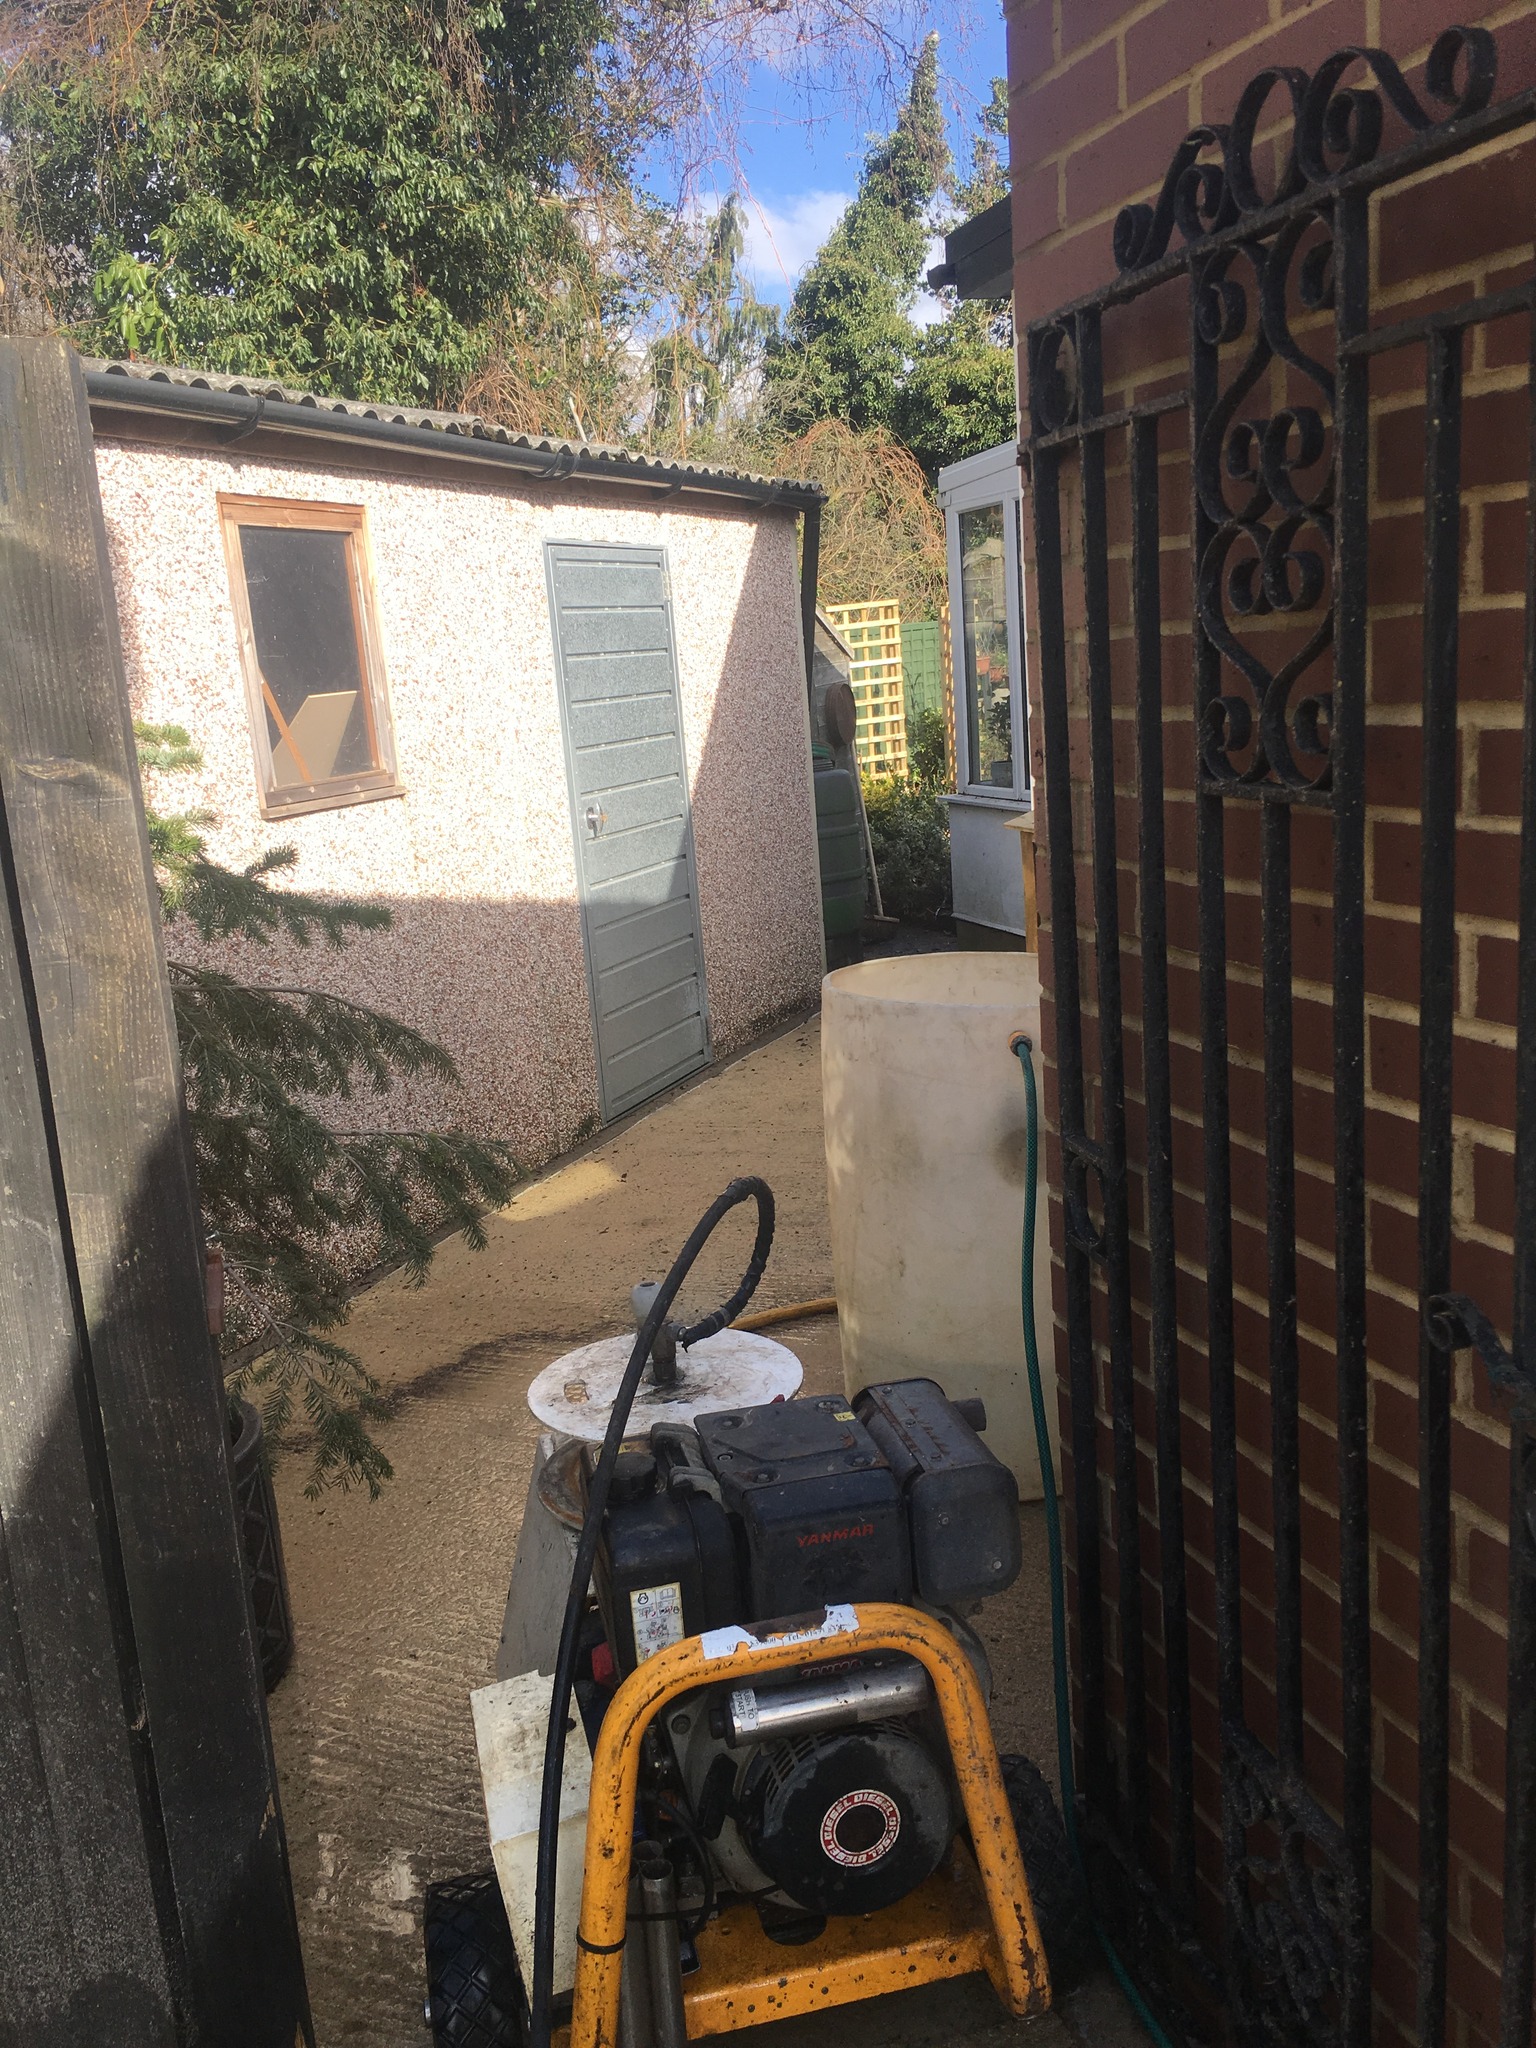 5 Things You Should Know About Belt-Driven Pressure Washers